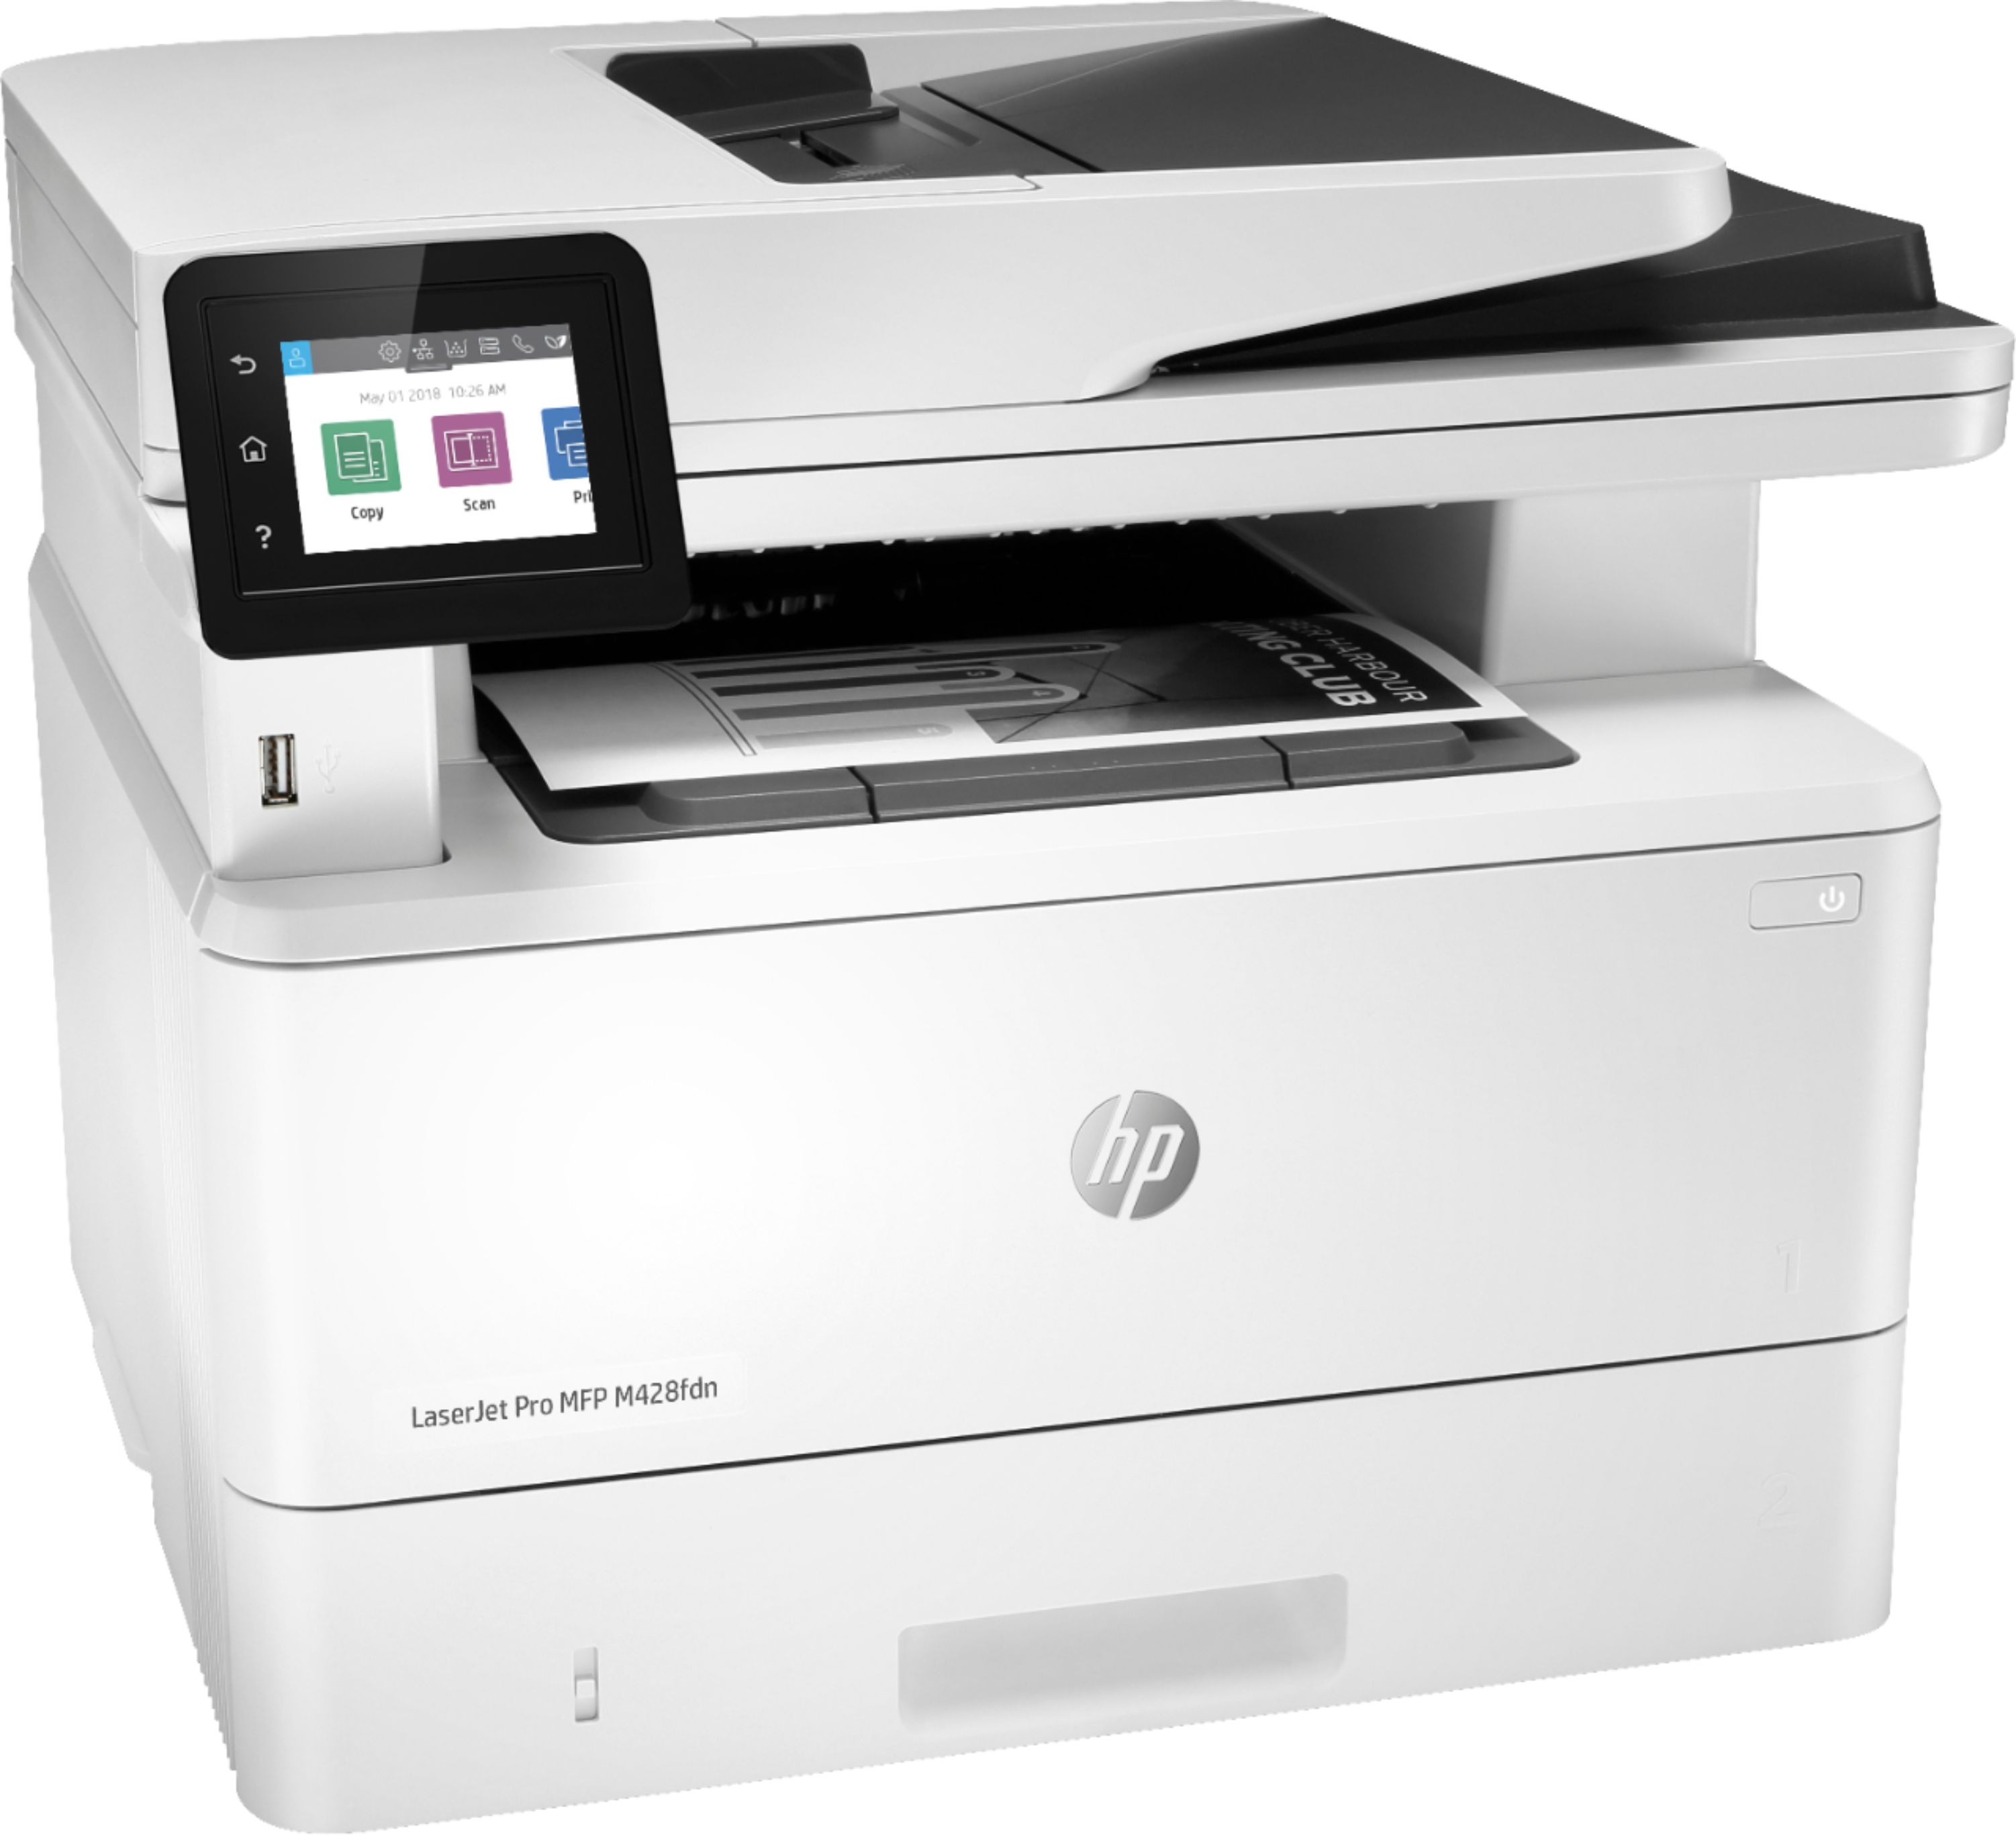 Angle View: HP - LaserJet Pro MFP M428fdn Black-and-White All-In-One Laser Printer - White